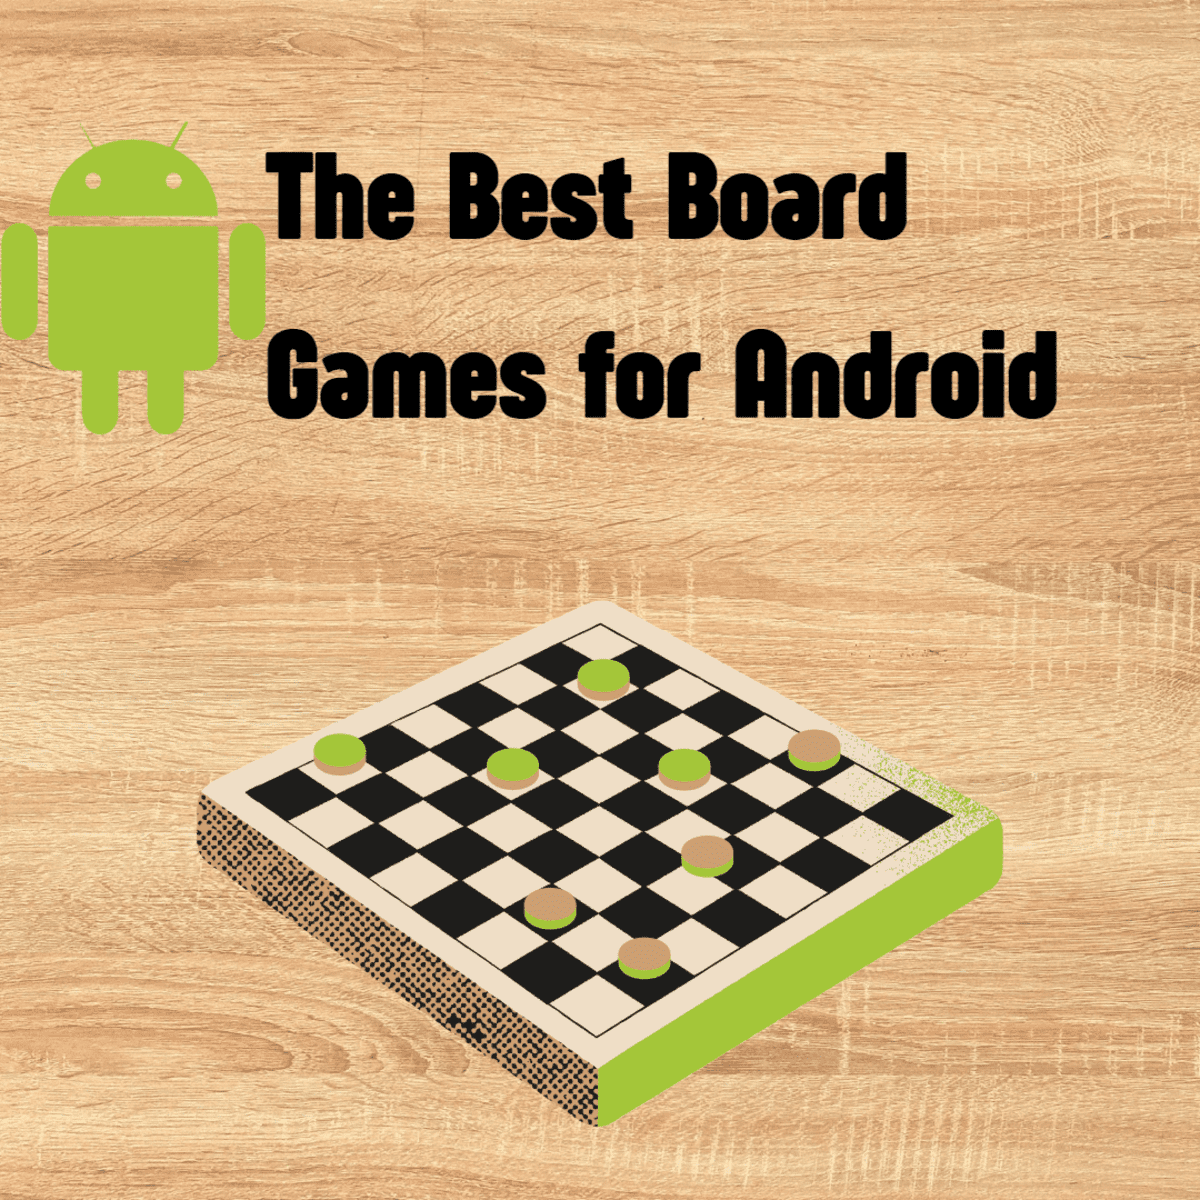 Fun and Entertaining 7 Best Board Games for Android for Teenagers